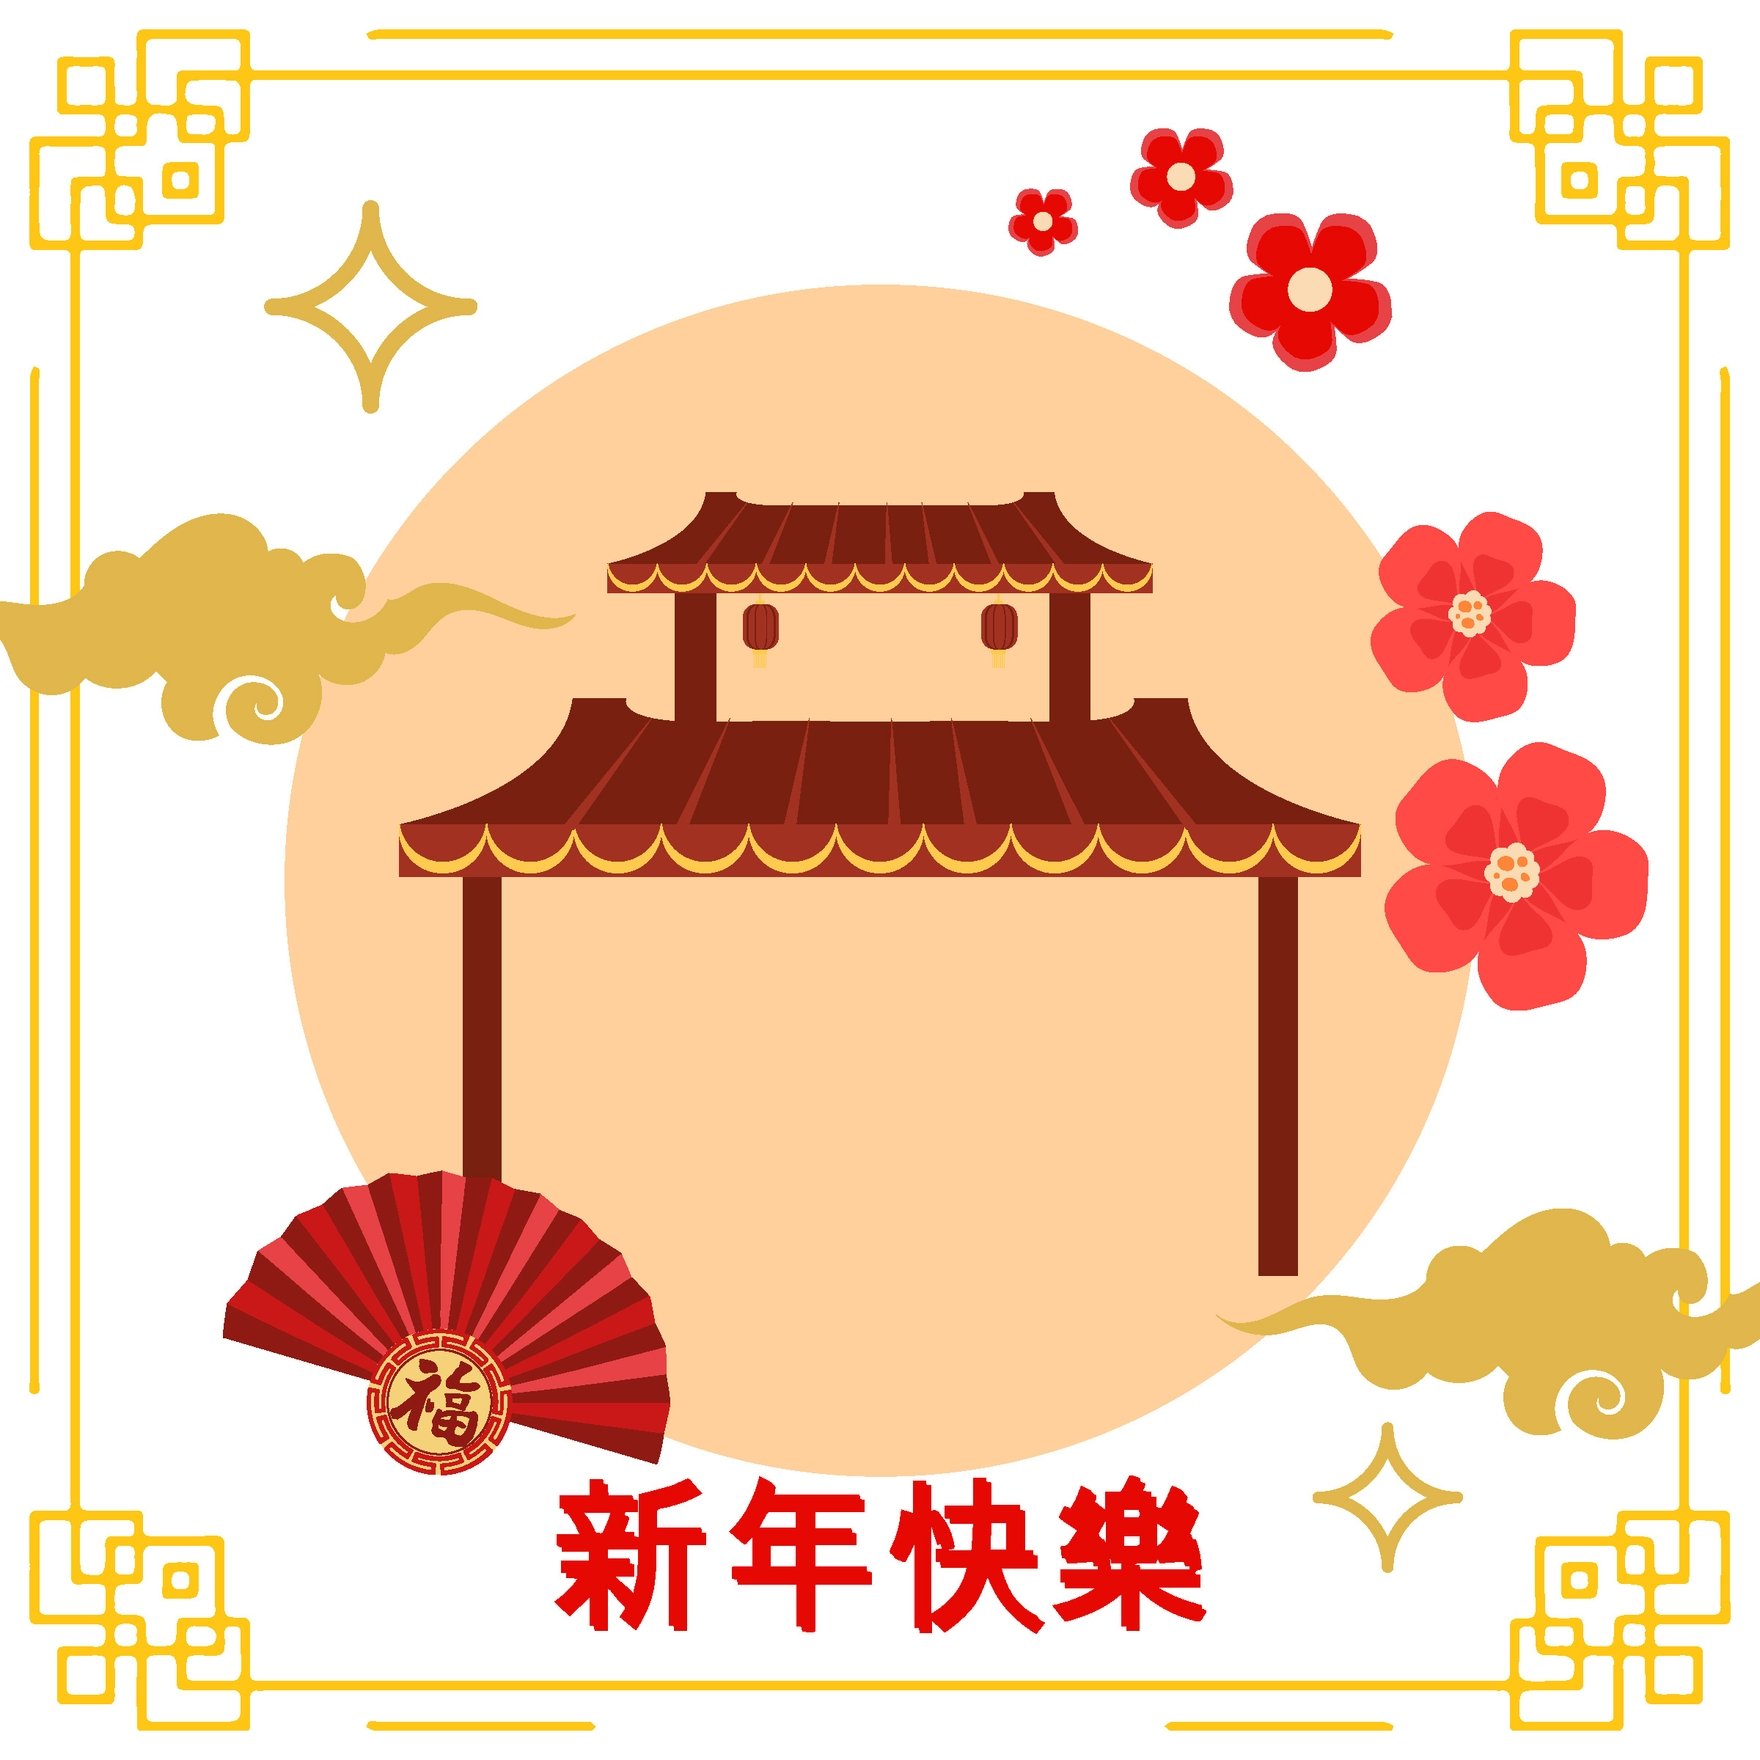 Chinese New Year Flat Design Vector in Illustrator, PSD, EPS, SVG, JPG, PNG